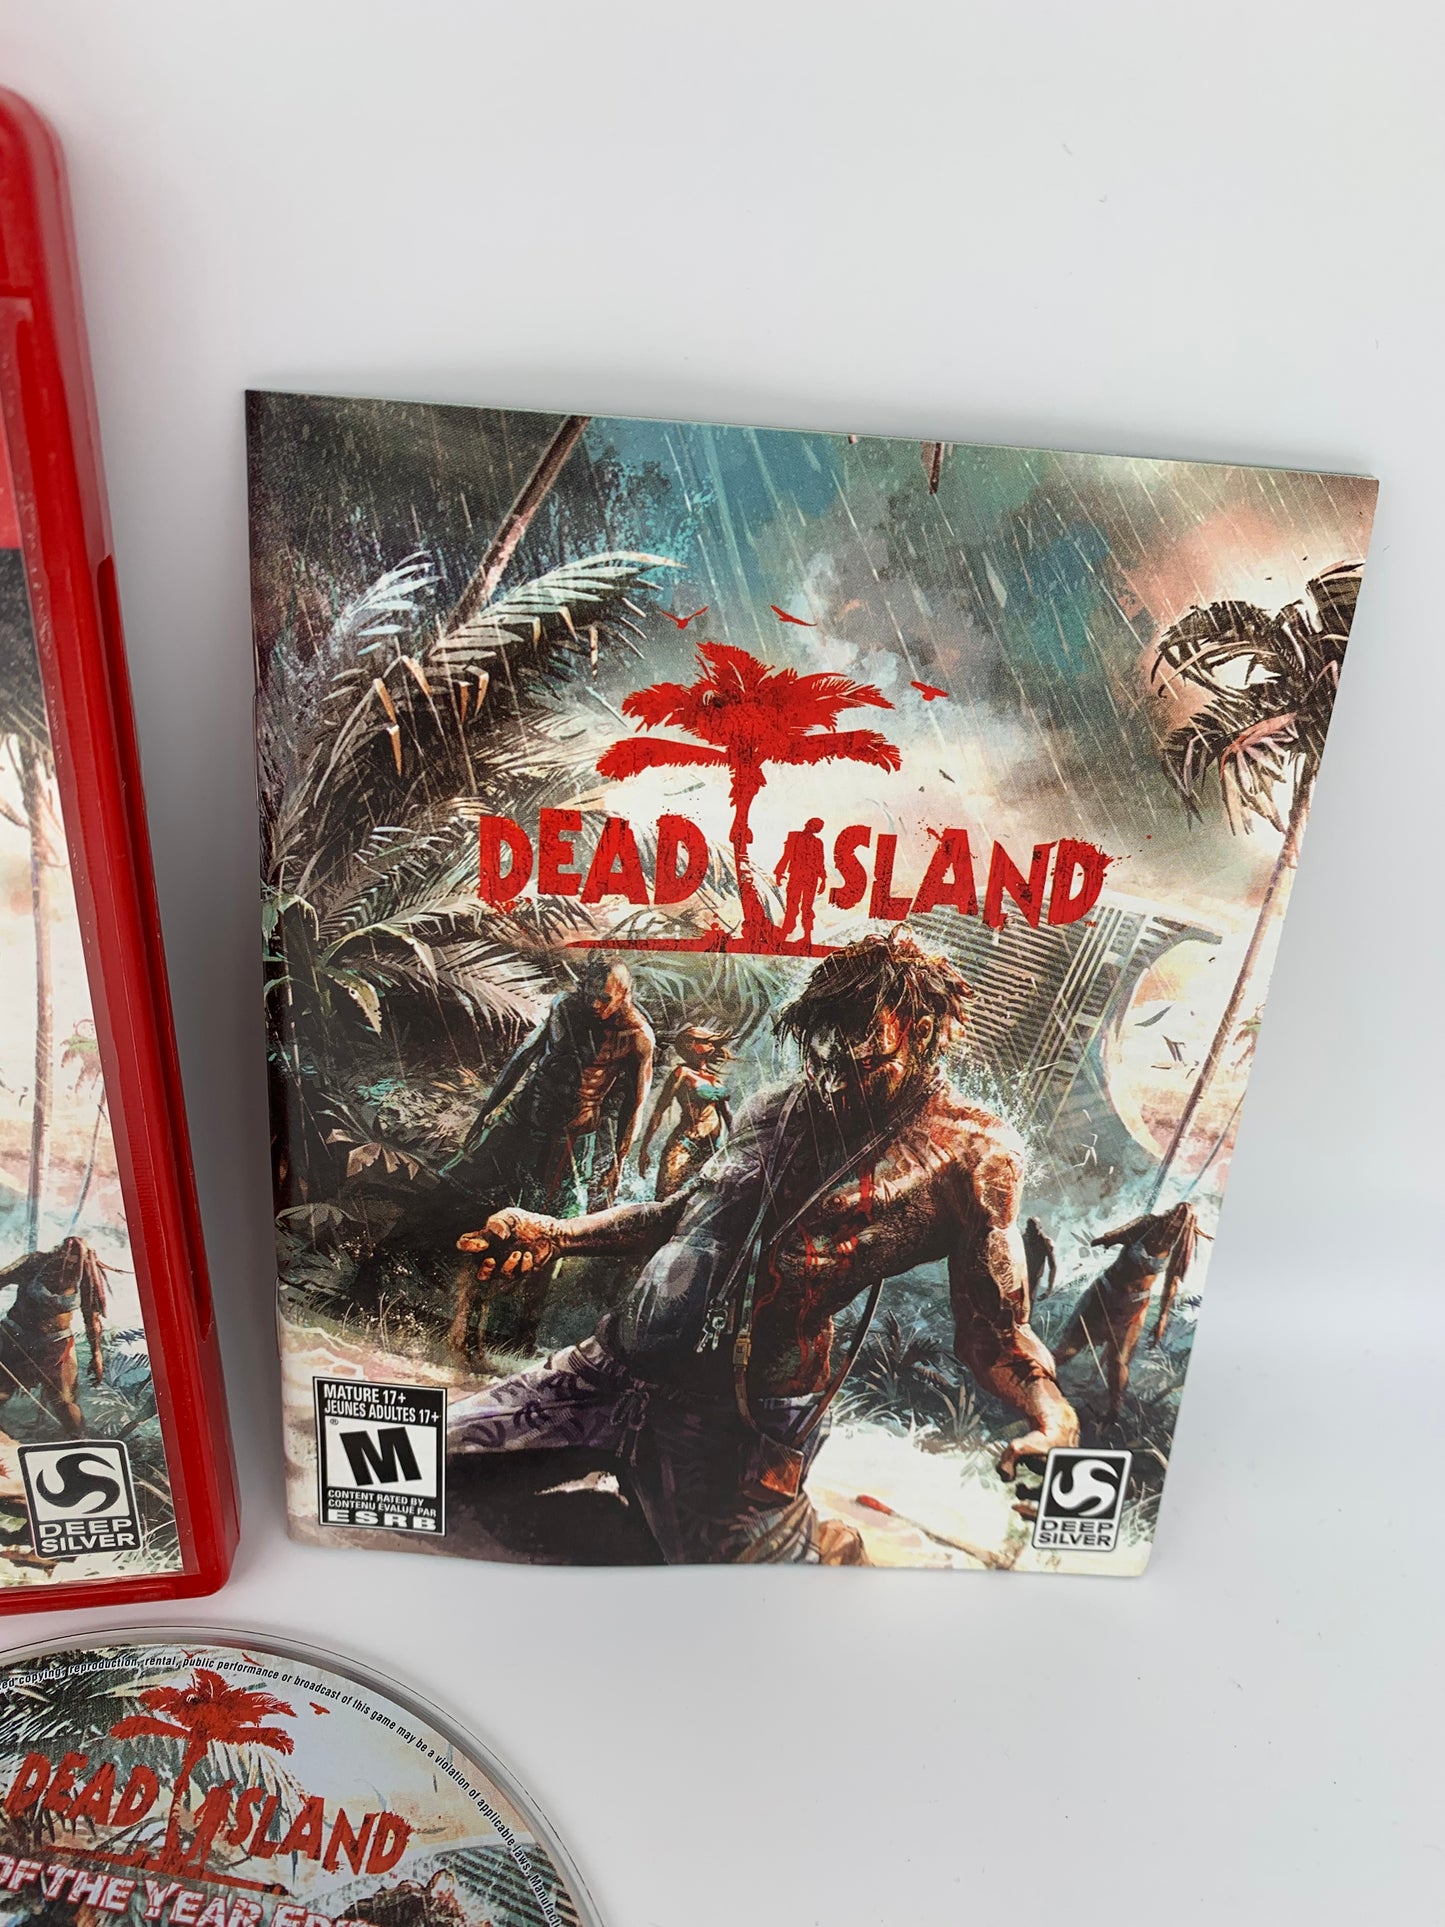 SONY PLAYSTATiON 3 [PS3] | DEAD iSLAND | GREATEST HiTS GAME OF THE YEAR EDiTiON